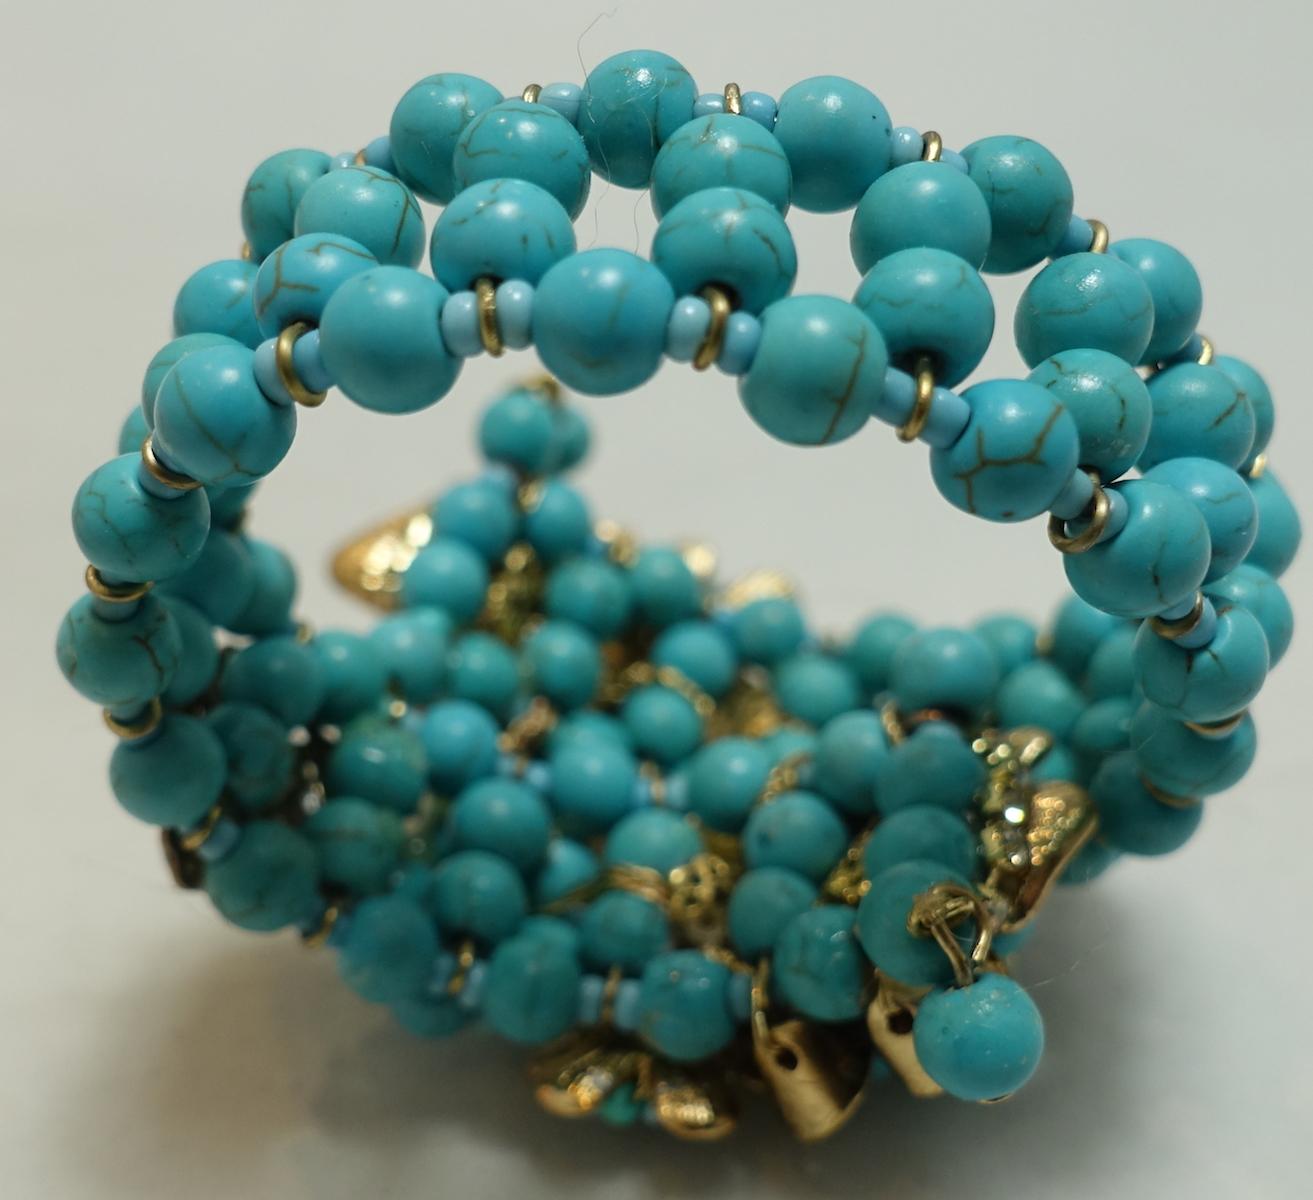 Vintage Miriam Haskell Turquoise Color Glass Beads & Crystal Wrap Bracelet In Good Condition For Sale In New York, NY